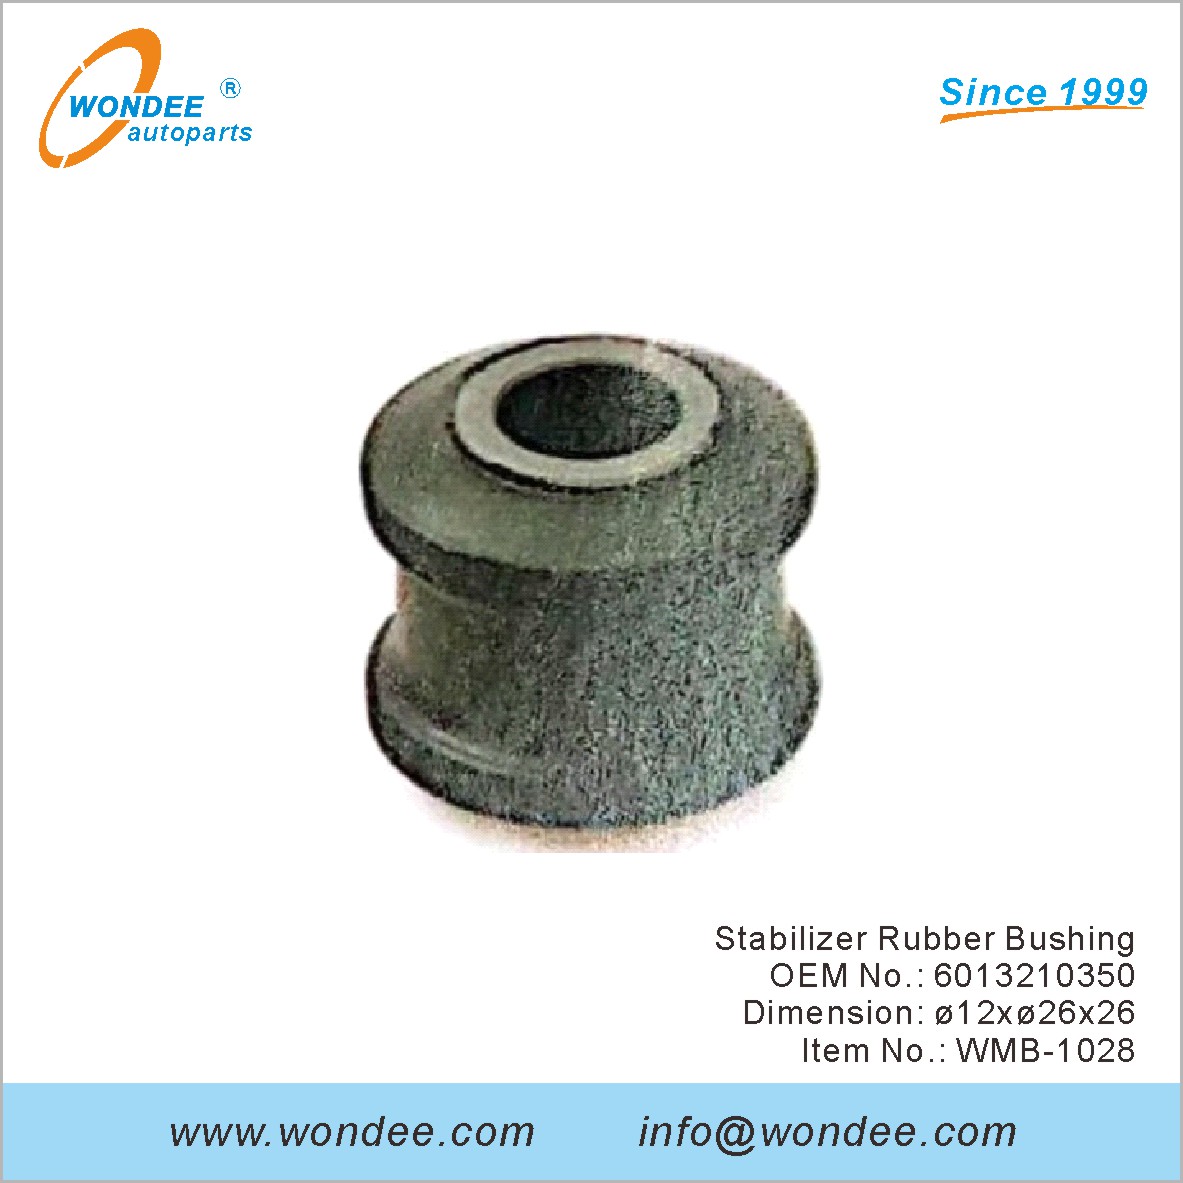 Stabilizer Rubber Bushing OEM 6013210350 for Benz from WONDEE